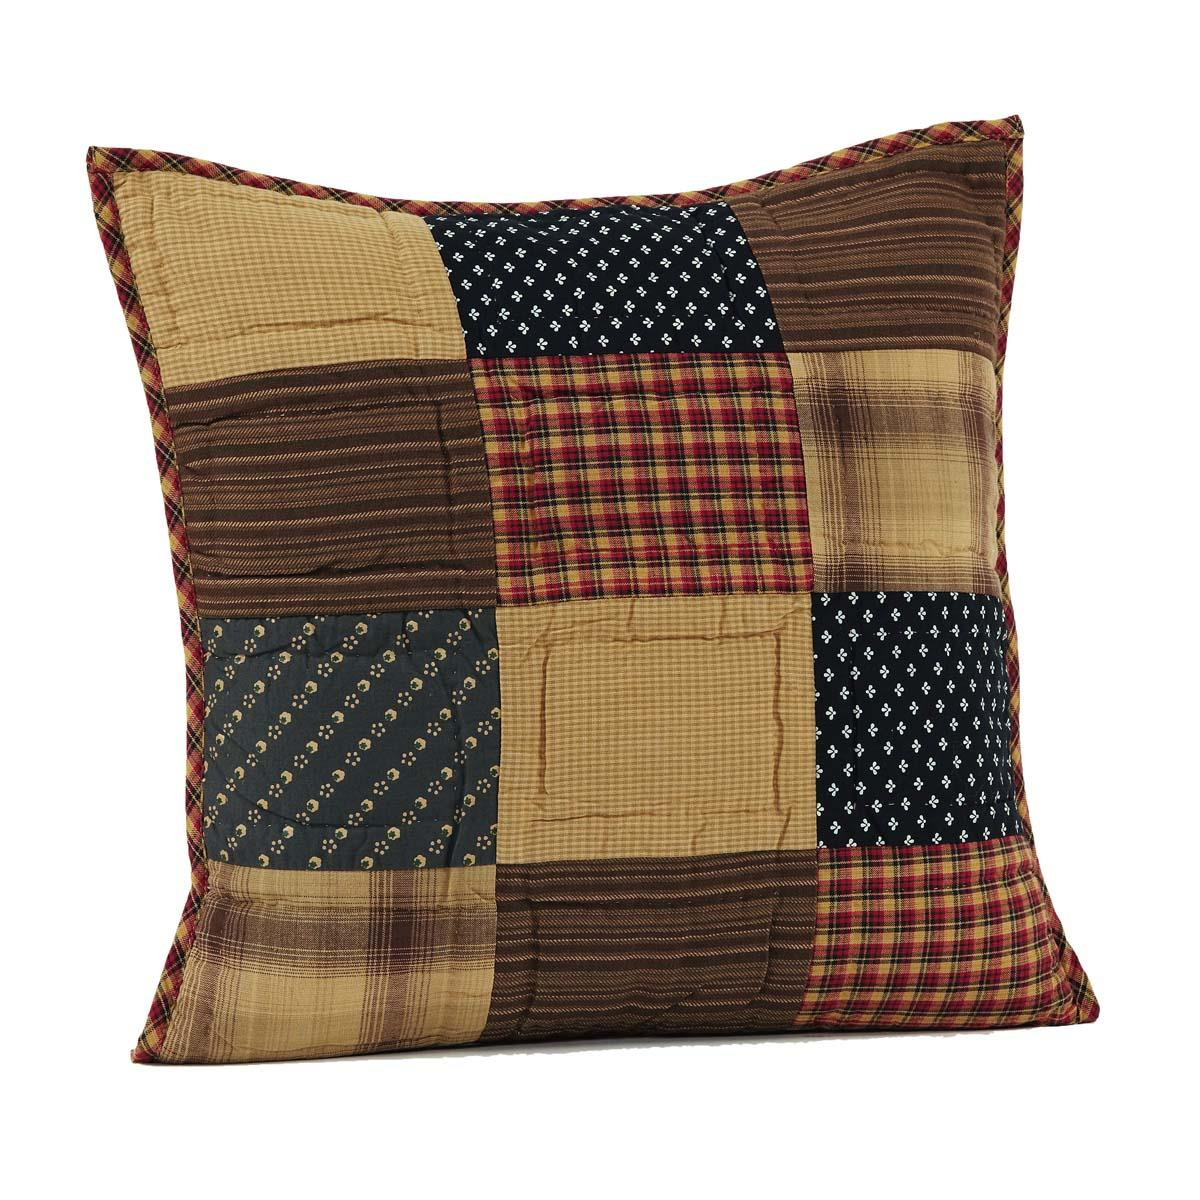 Patriotic Patch Quilted Pillow